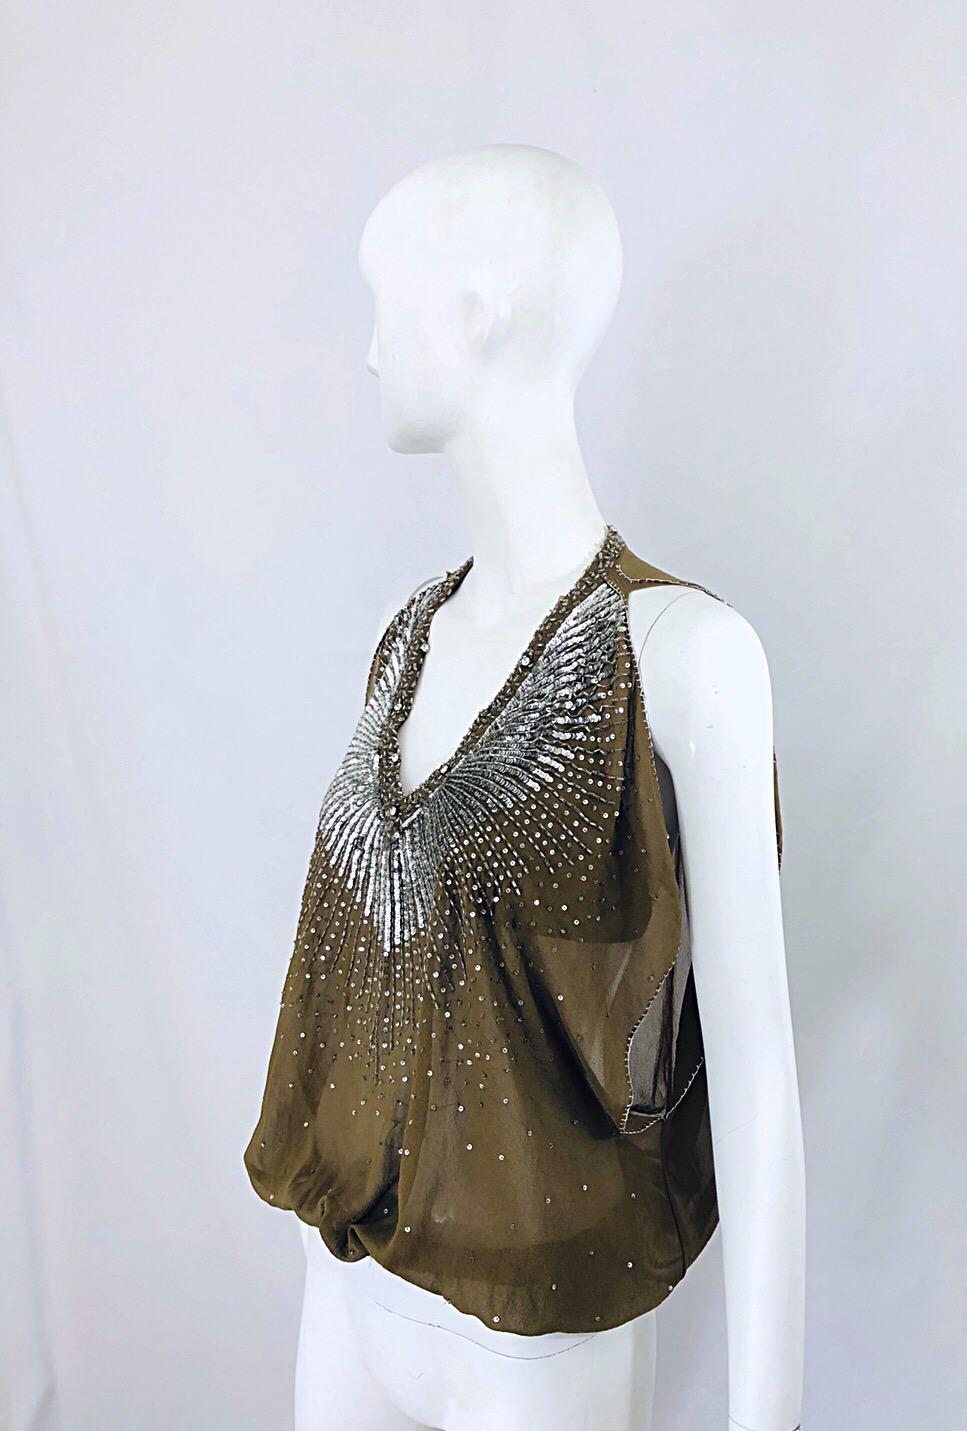 Roberto Cavalli Early 2000s Army Green Silk Chiffon Rhinestone Beaded Sheer Top In Excellent Condition For Sale In San Diego, CA